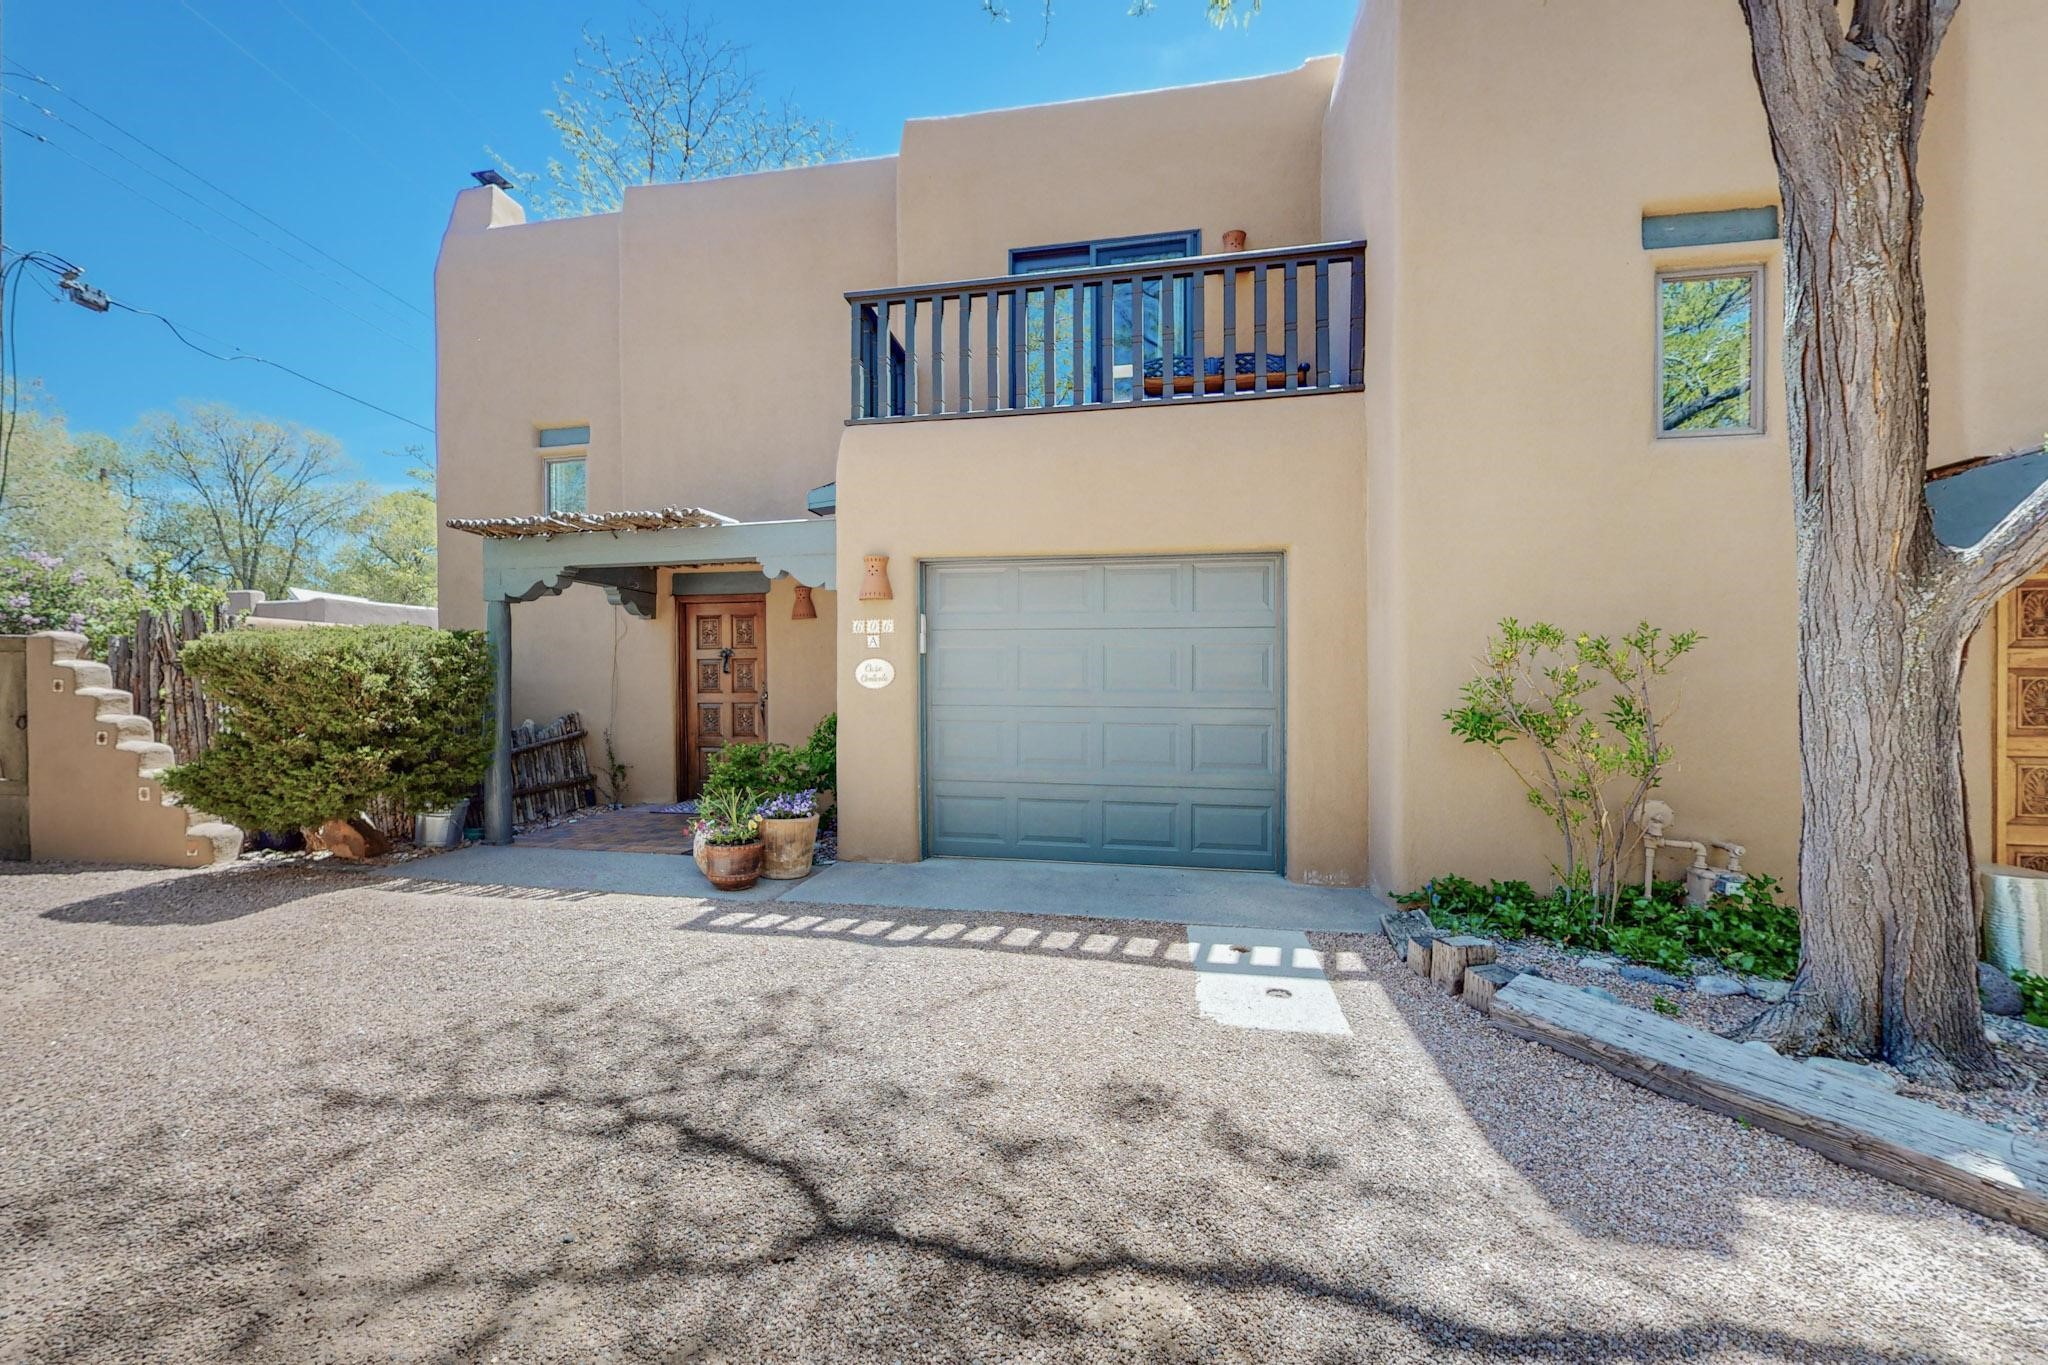 606 Griffin Street A, Santa Fe, New Mexico 87501, 2 Bedrooms Bedrooms, ,3 BathroomsBathrooms,Residential,For Sale,606 Griffin Street A,202401420